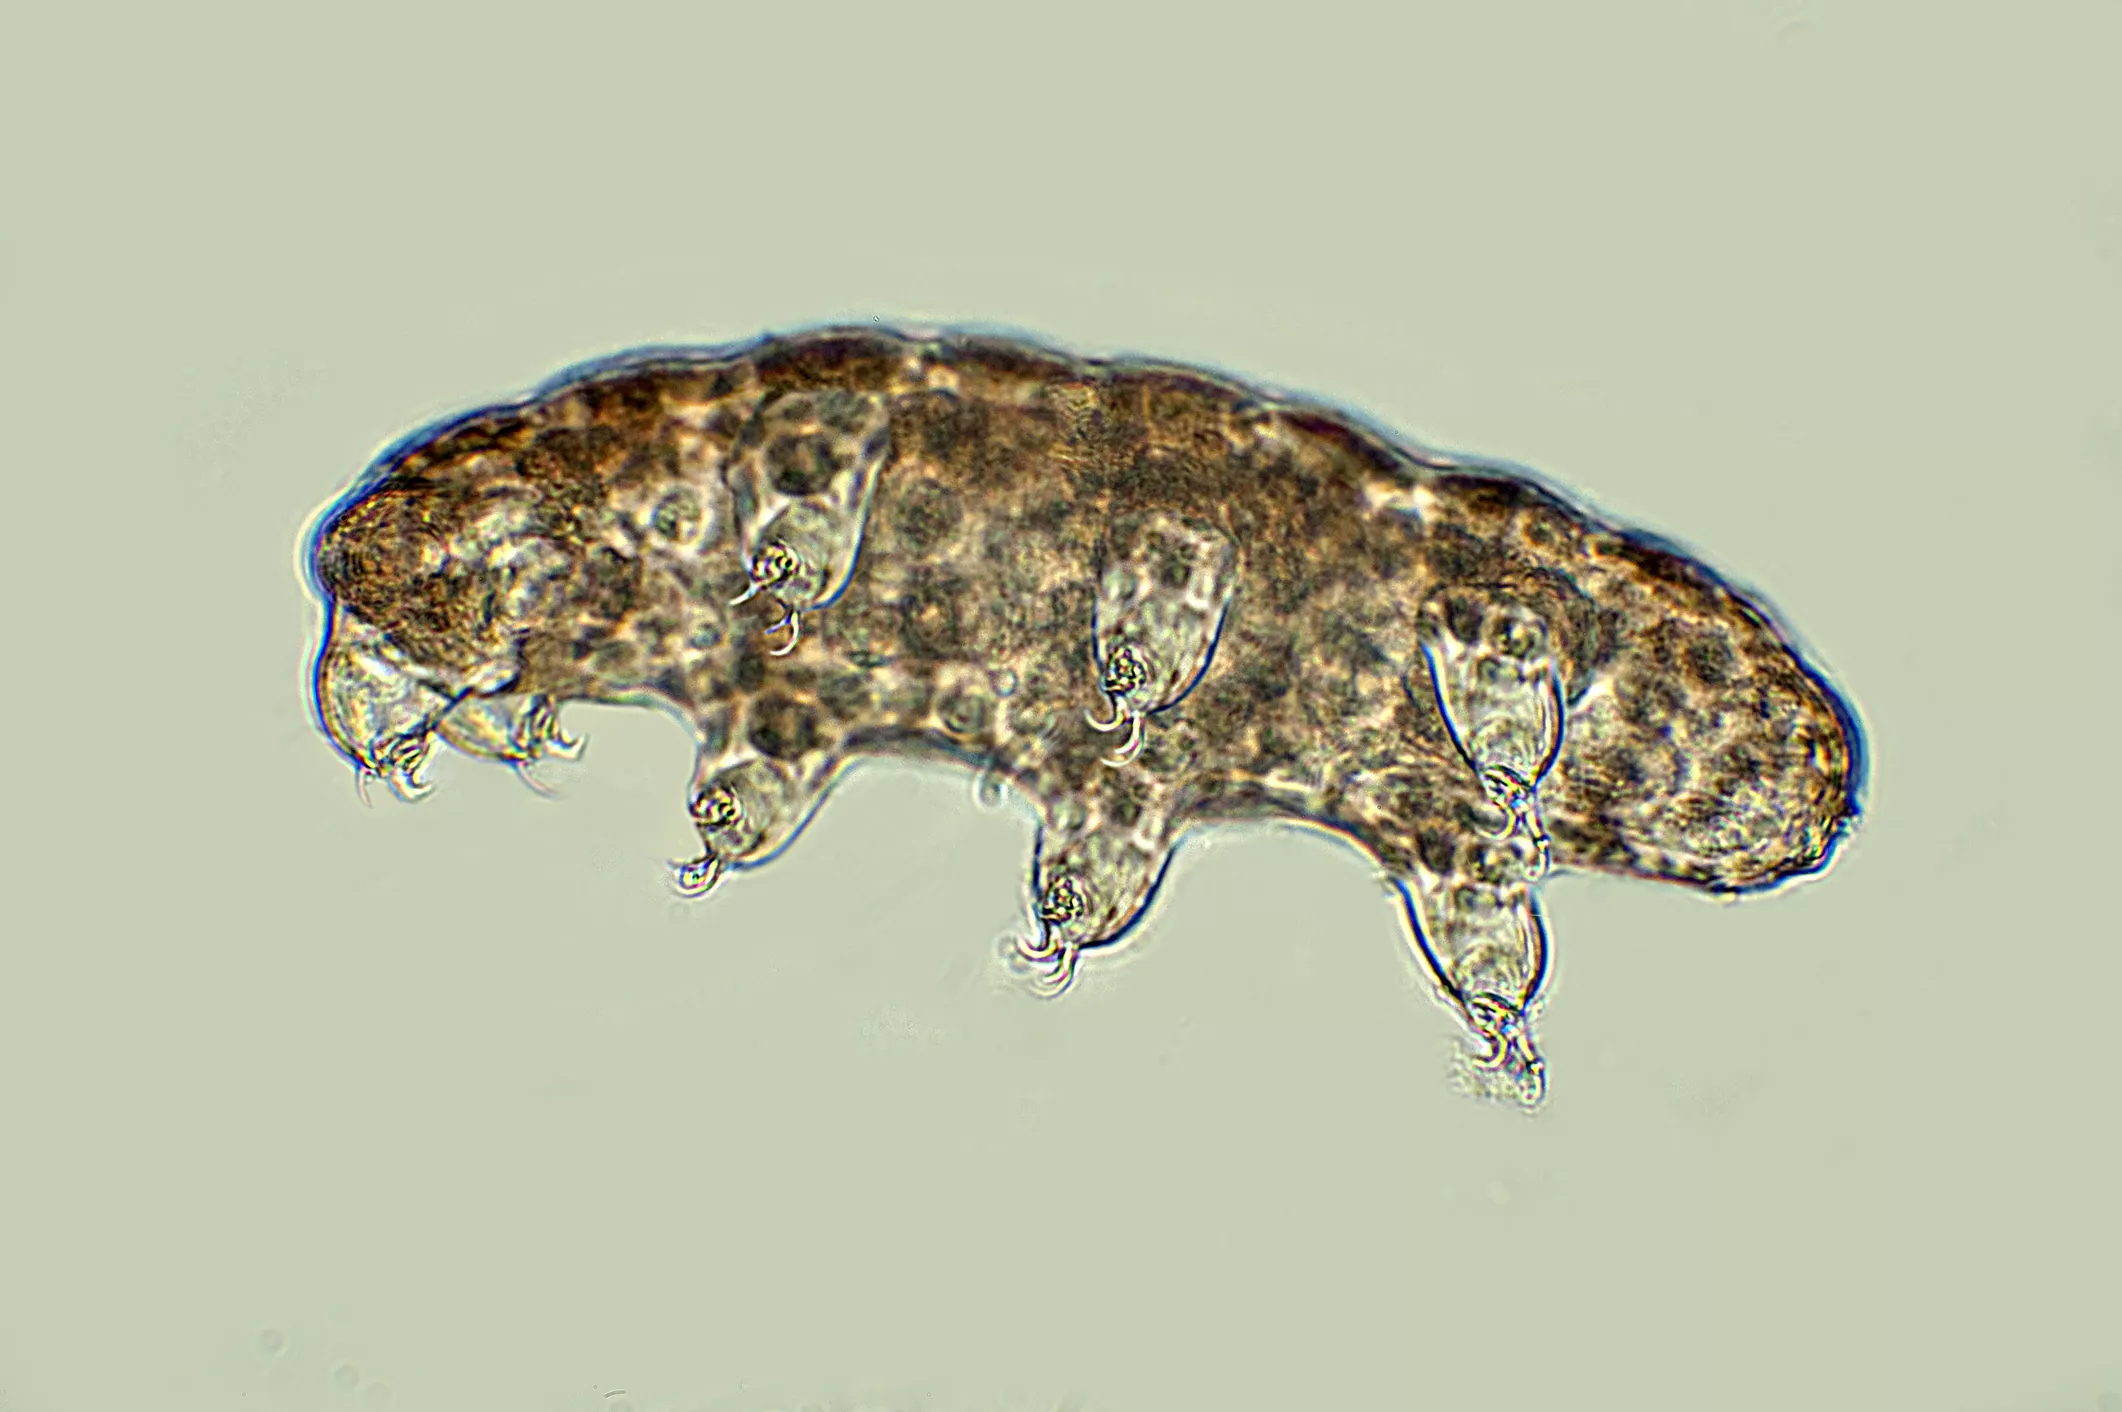 tardigrade magnified by microscope